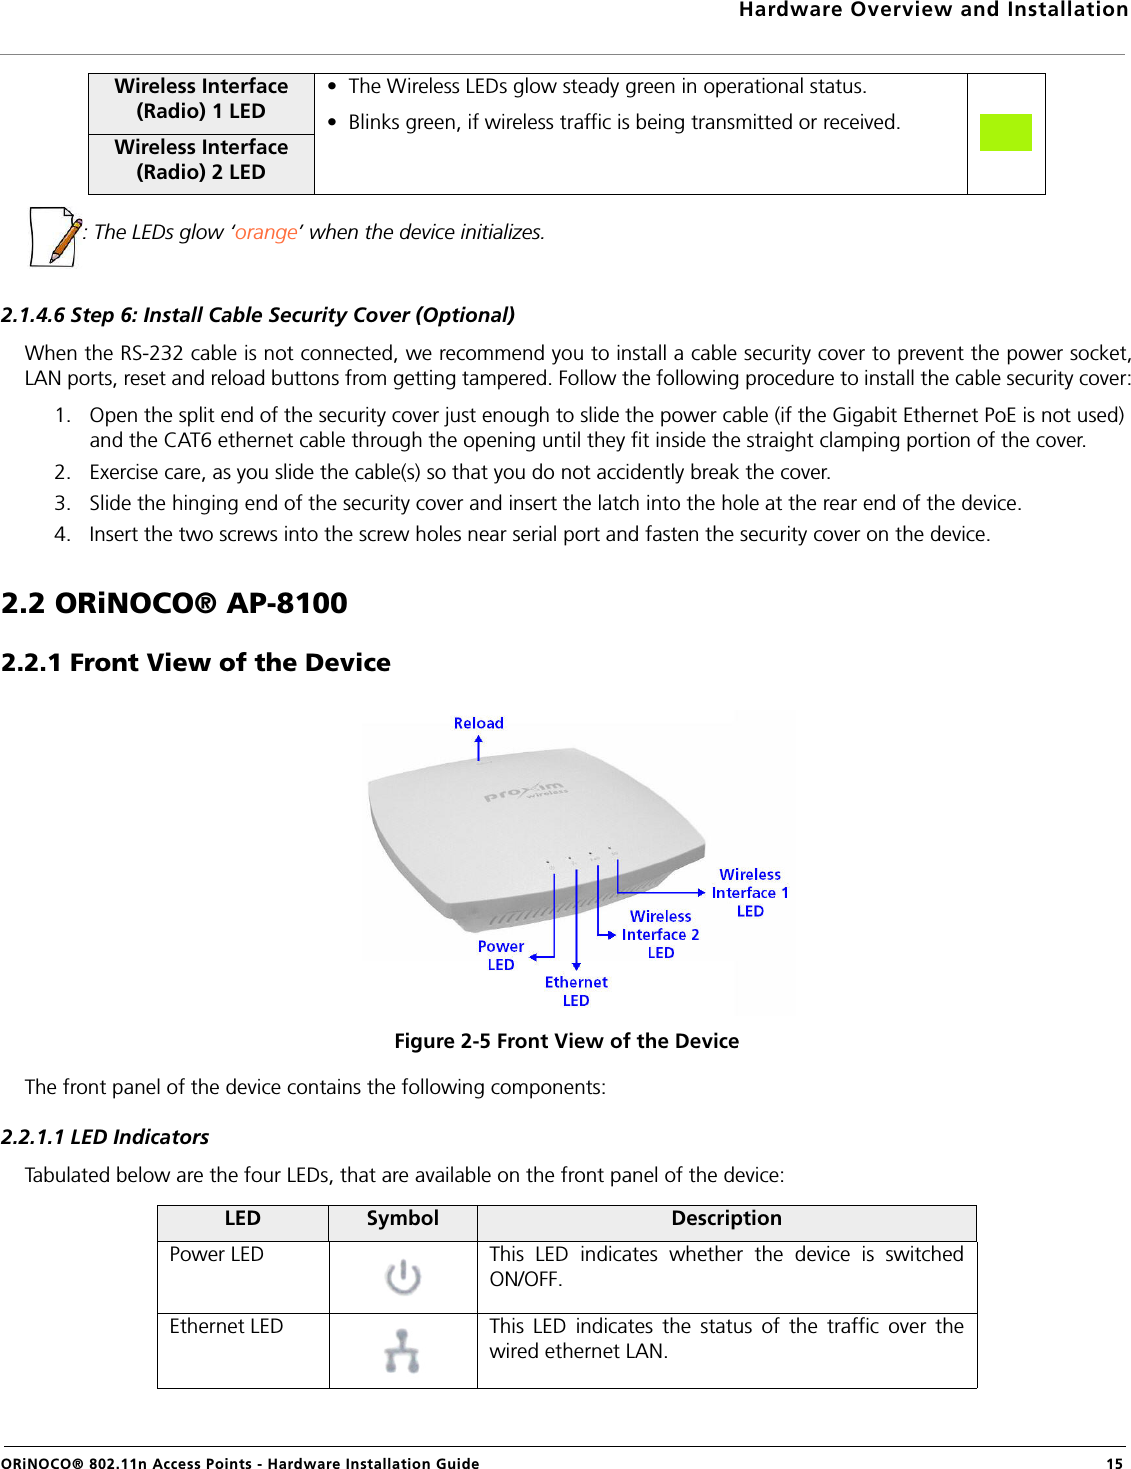 Hardware Overview and InstallationORiNOCO® 802.11n Access Points - Hardware Installation Guide  15: The LEDs glow ‘orange’ when the device initializes.2.1.4.6 Step 6: Install Cable Security Cover (Optional)When the RS-232 cable is not connected, we recommend you to install a cable security cover to prevent the power socket,LAN ports, reset and reload buttons from getting tampered. Follow the following procedure to install the cable security cover:1. Open the split end of the security cover just enough to slide the power cable (if the Gigabit Ethernet PoE is not used) and the CAT6 ethernet cable through the opening until they fit inside the straight clamping portion of the cover.2. Exercise care, as you slide the cable(s) so that you do not accidently break the cover.3. Slide the hinging end of the security cover and insert the latch into the hole at the rear end of the device. 4. Insert the two screws into the screw holes near serial port and fasten the security cover on the device.2.2 ORiNOCO® AP-81002.2.1 Front View of the DeviceFigure 2-5 Front View of the DeviceThe front panel of the device contains the following components:2.2.1.1 LED IndicatorsTabulated below are the four LEDs, that are available on the front panel of the device:Wireless Interface (Radio) 1 LED•  The Wireless LEDs glow steady green in operational status.•  Blinks green, if wireless traffic is being transmitted or received.Wireless Interface (Radio) 2 LEDLED Symbol DescriptionPower LED This LED indicates whether the device is switchedON/OFF.Ethernet LED This LED indicates the status of the traffic over thewired ethernet LAN.